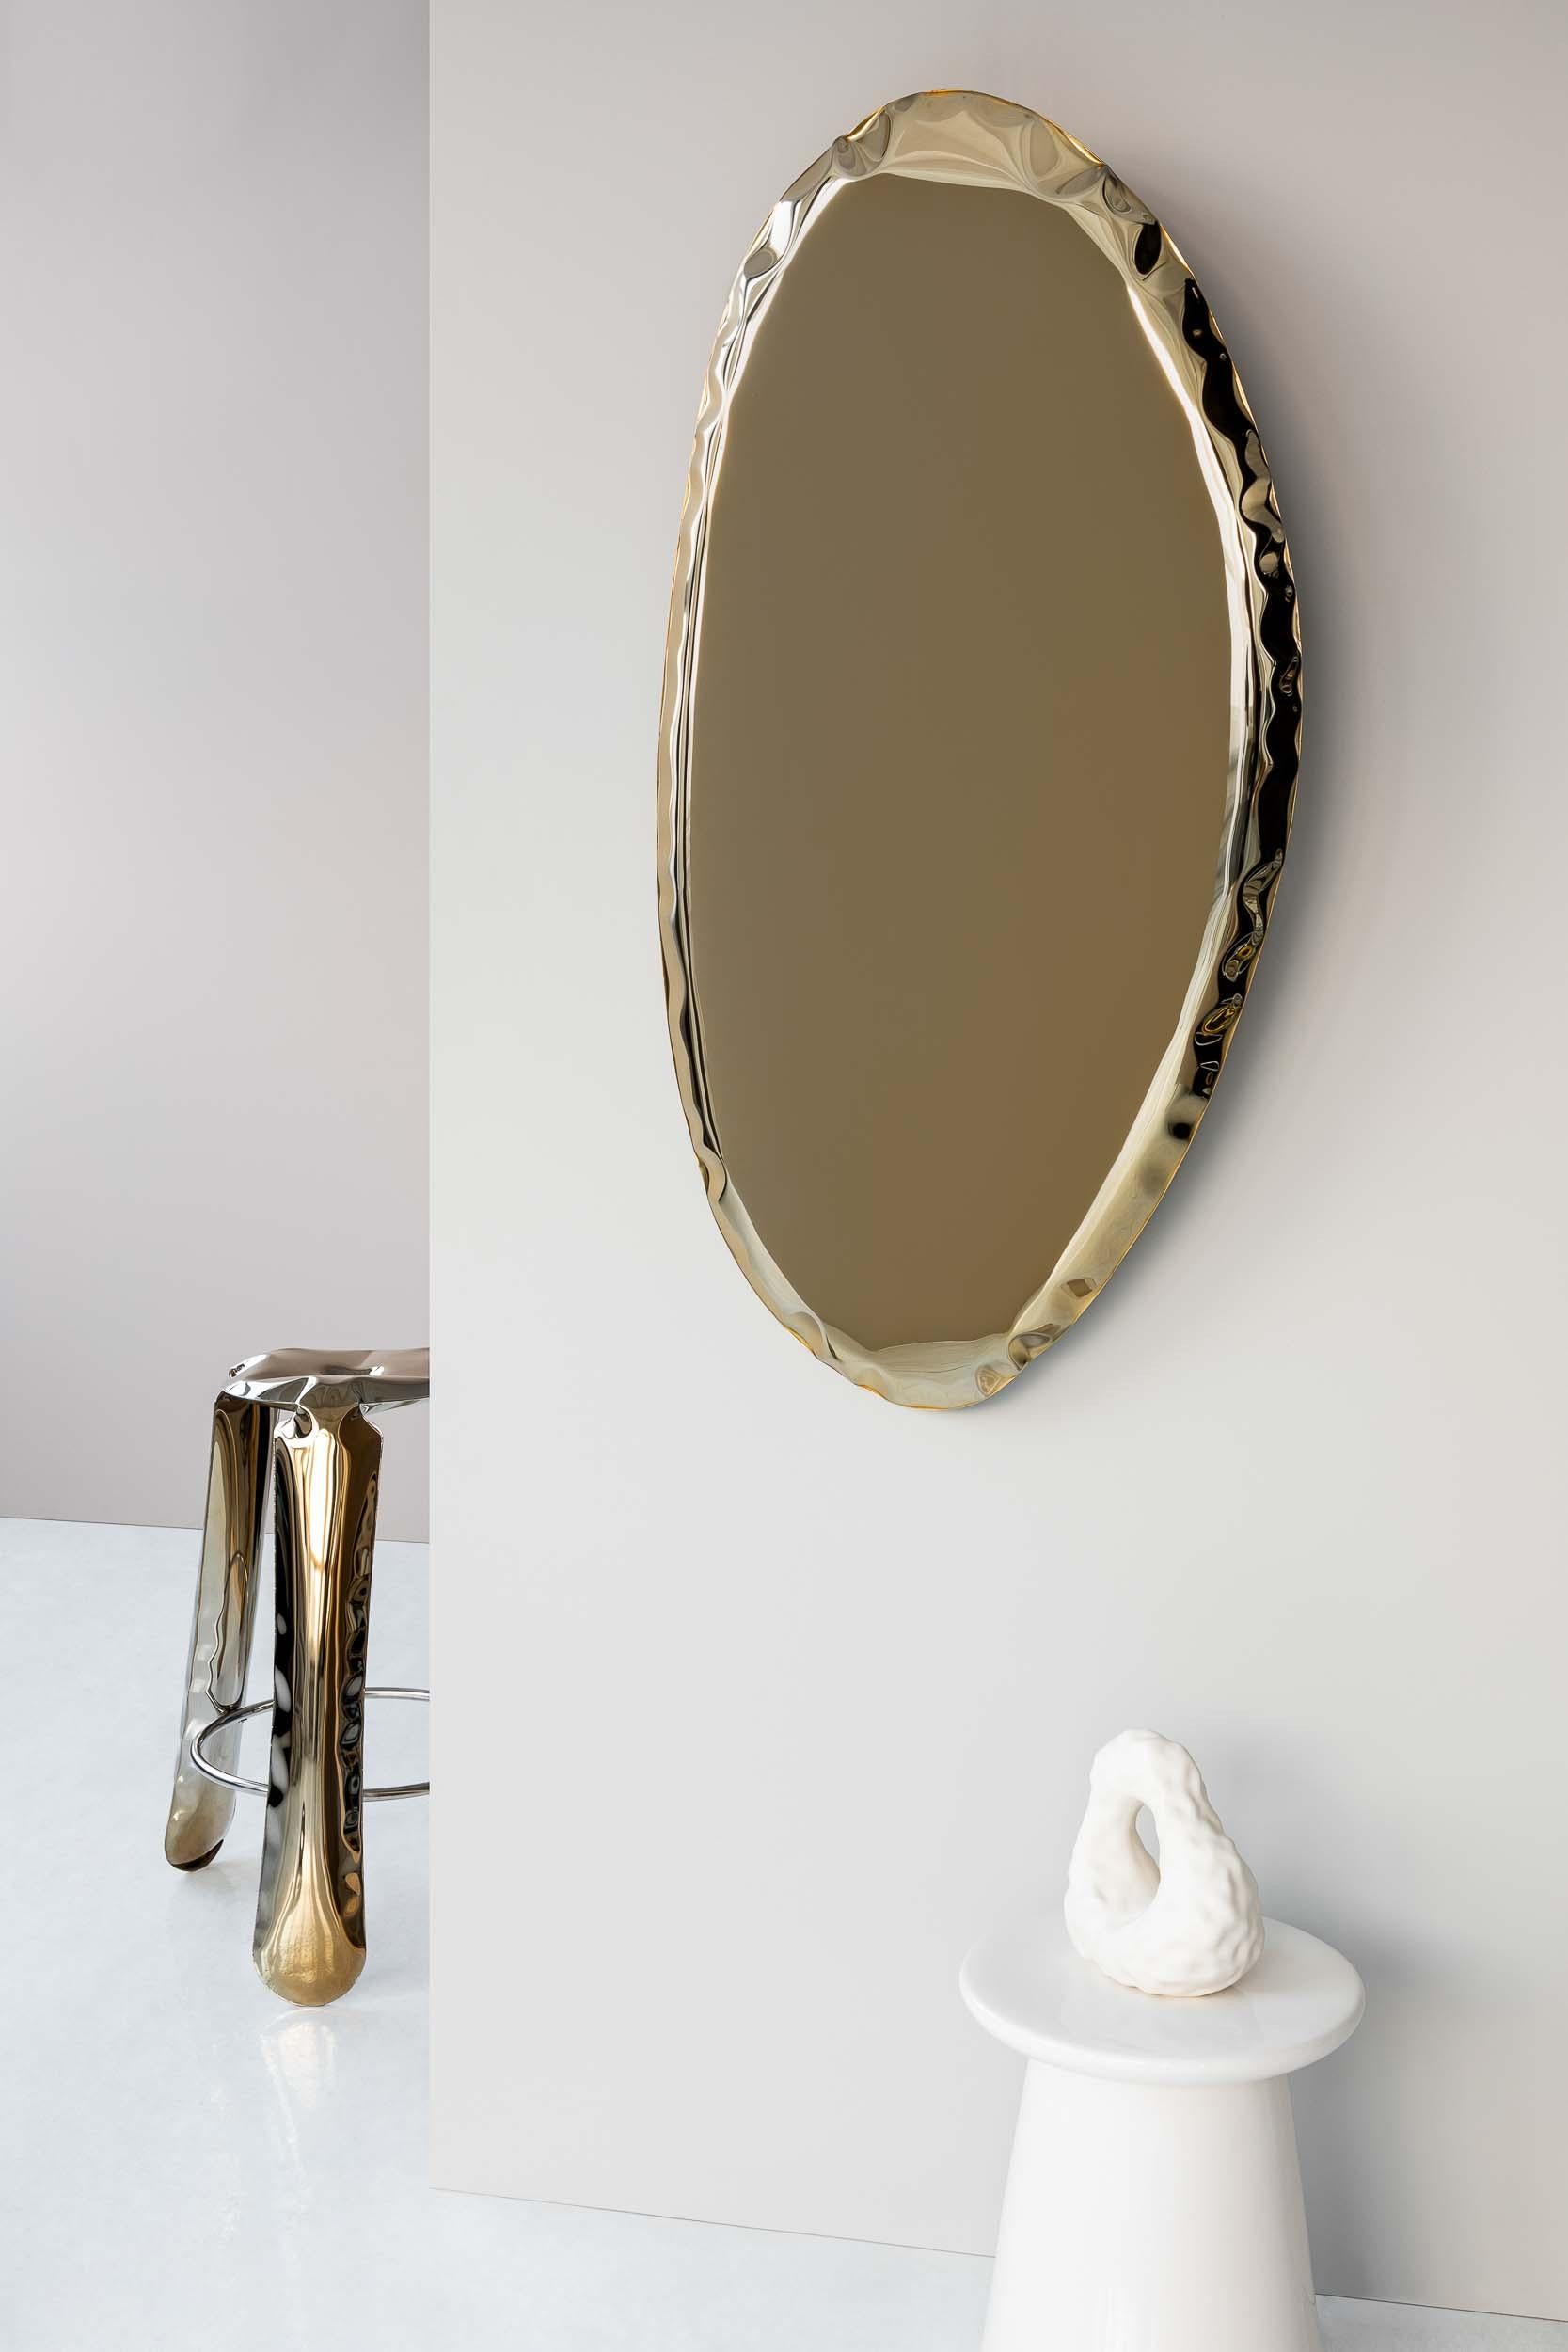 Polished Contemporary Mirror 'Tafla O5', AURUM Collection, Classic Gold, by Zieta For Sale